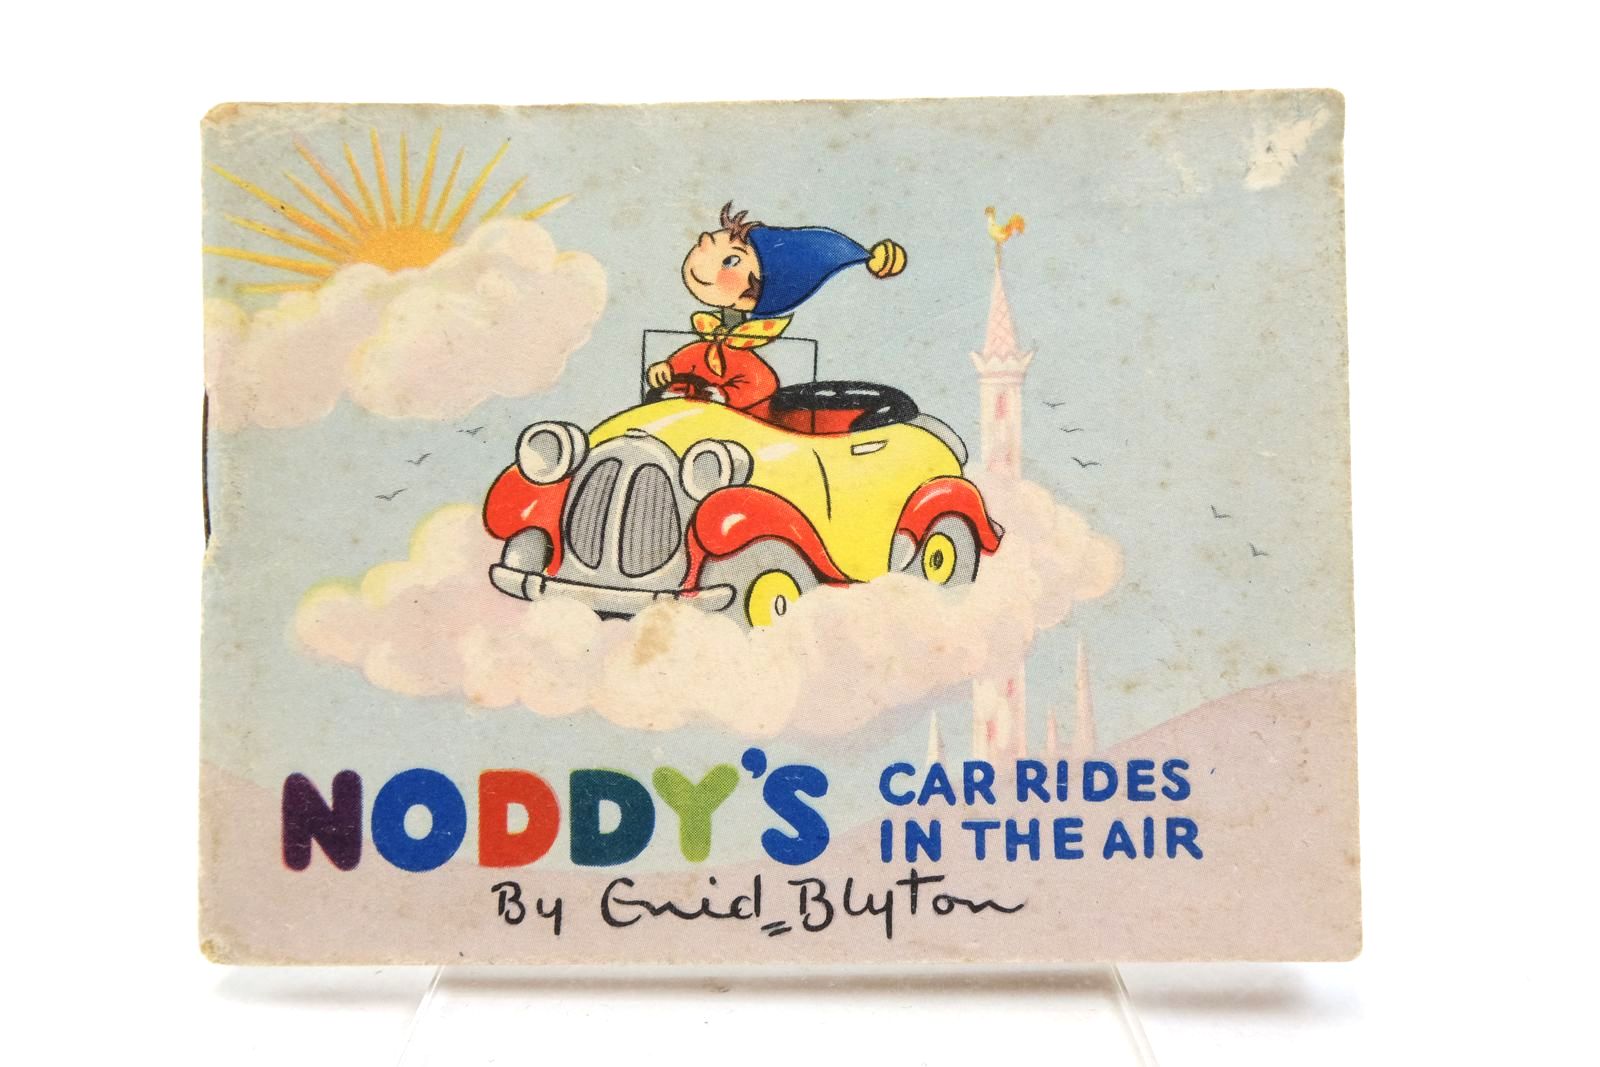 Photo of NODDY'S CAR RIDES IN THE AIR written by Blyton, Enid illustrated by Beek,  published by Sampson Low (STOCK CODE: 2138060)  for sale by Stella & Rose's Books